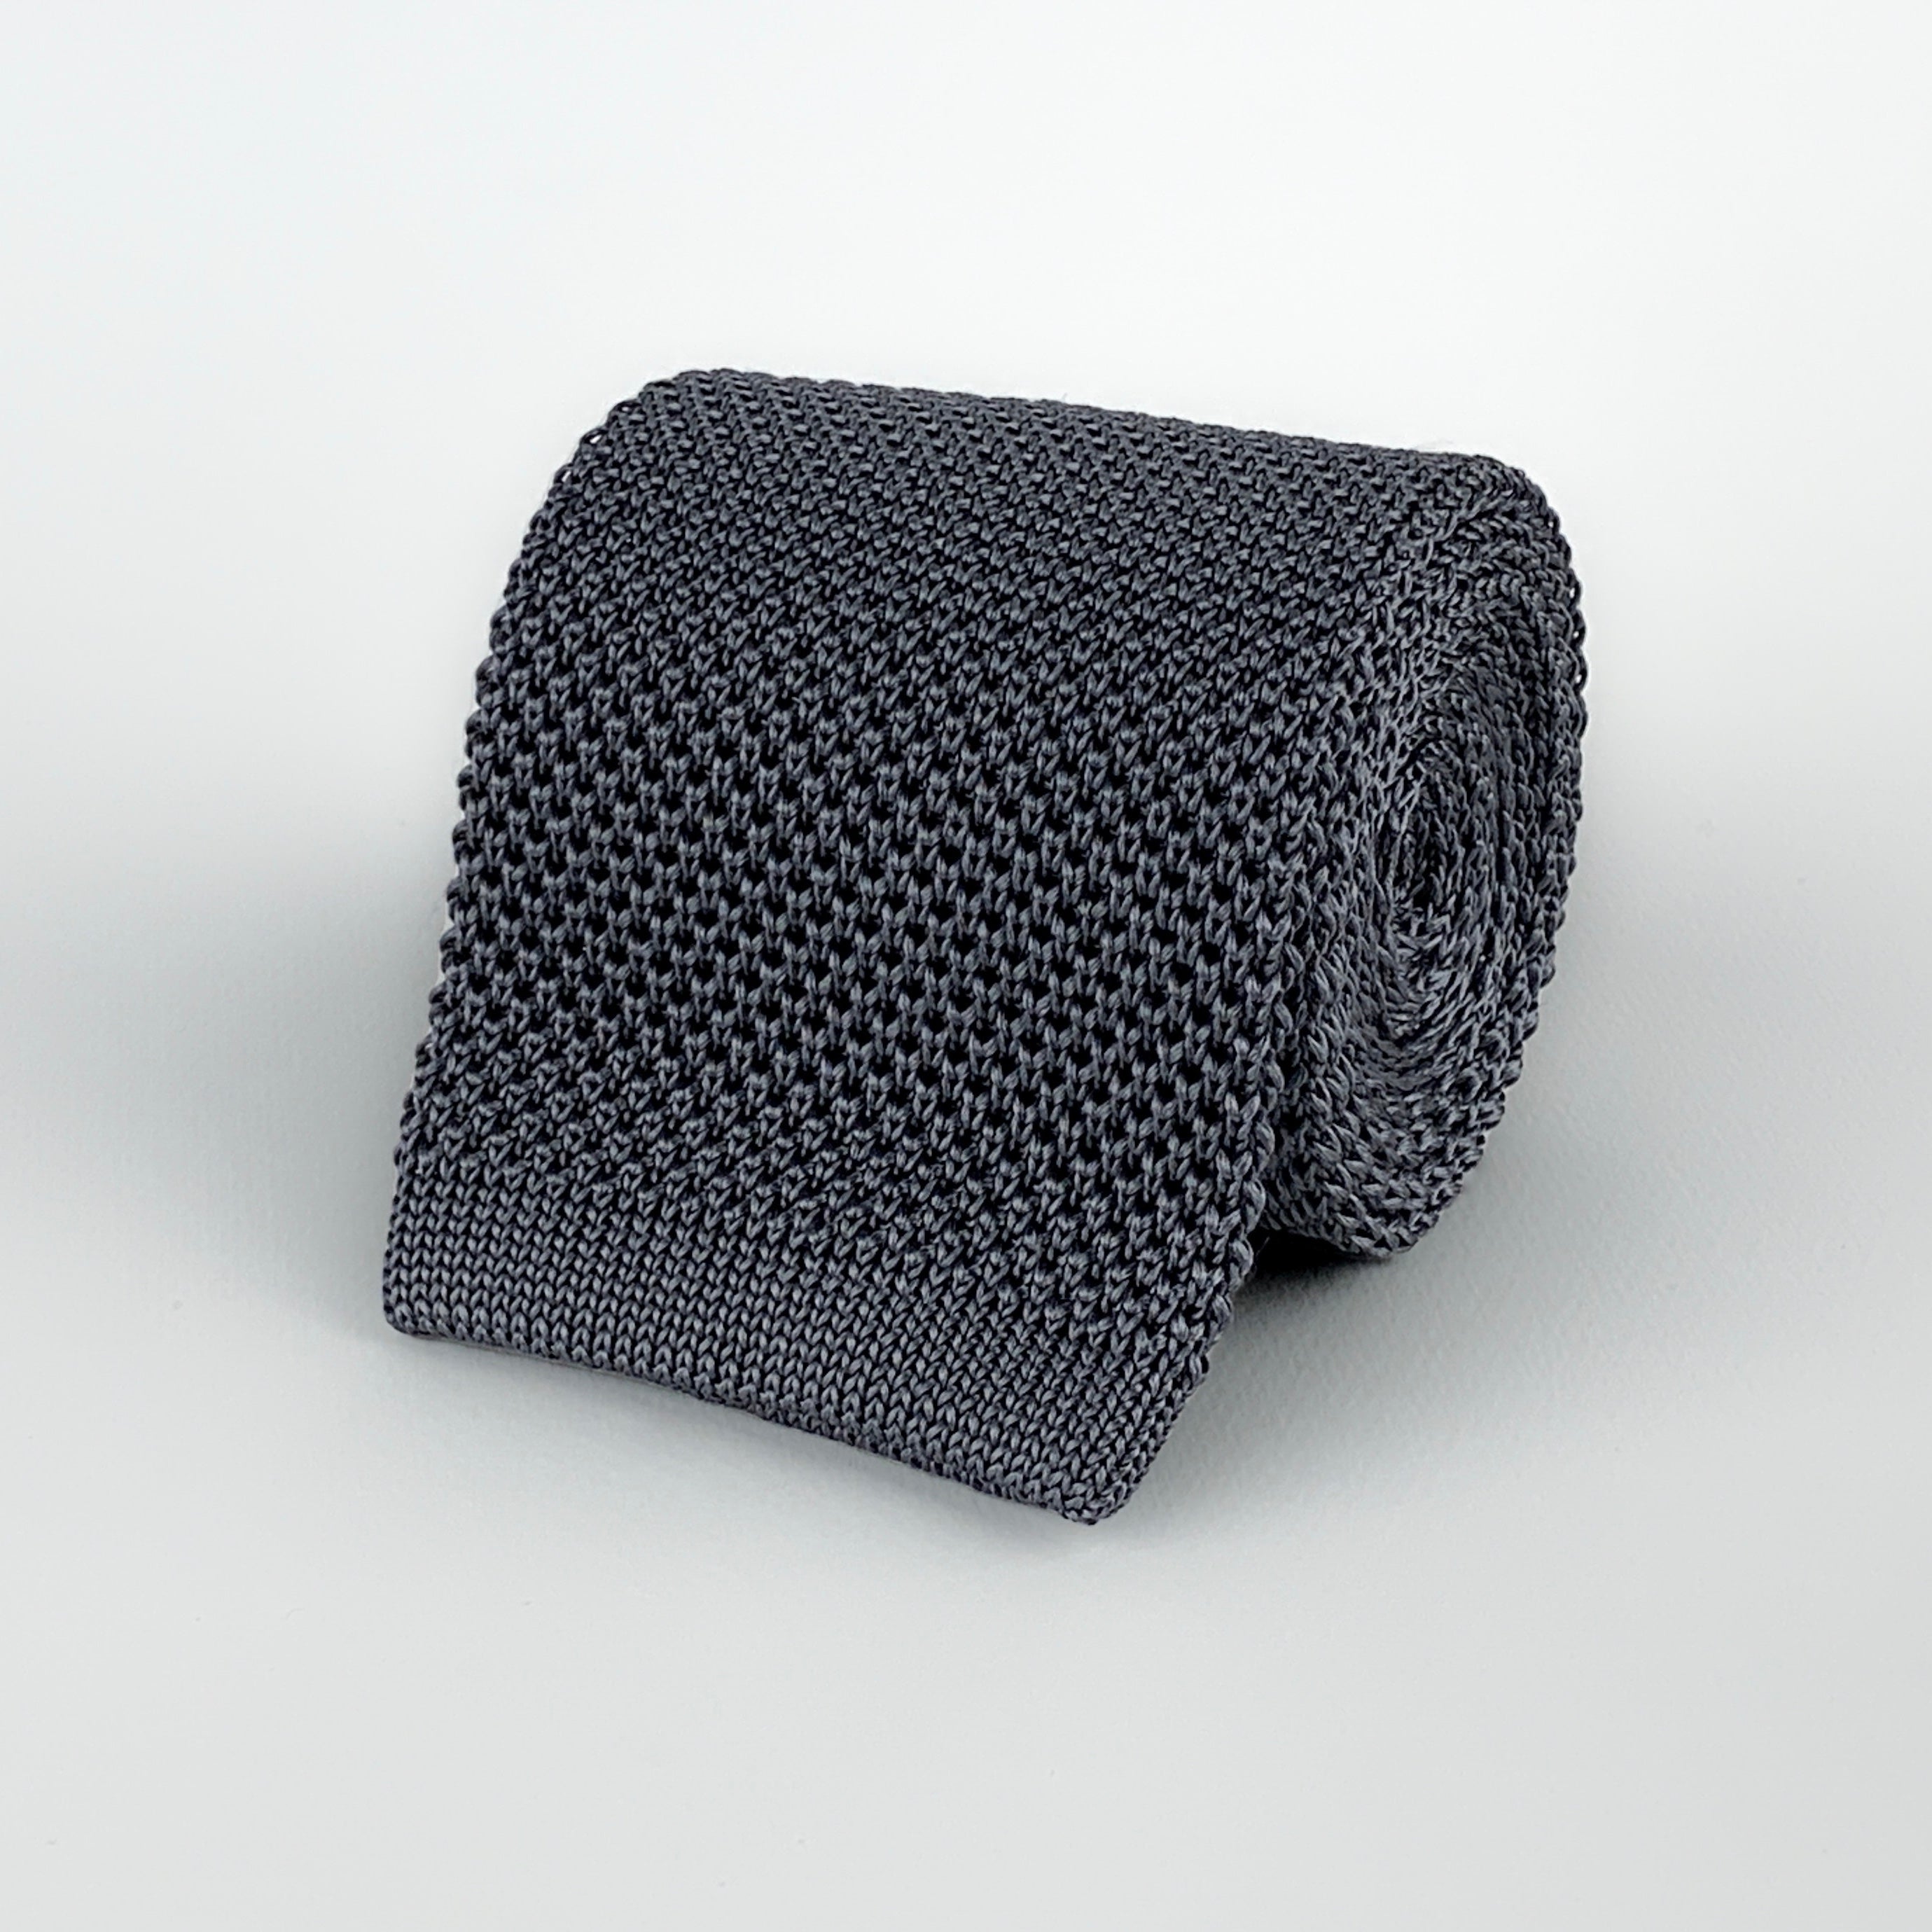 Dark grey mulberry silk knitted tie with a square end rolled and placed on a white background